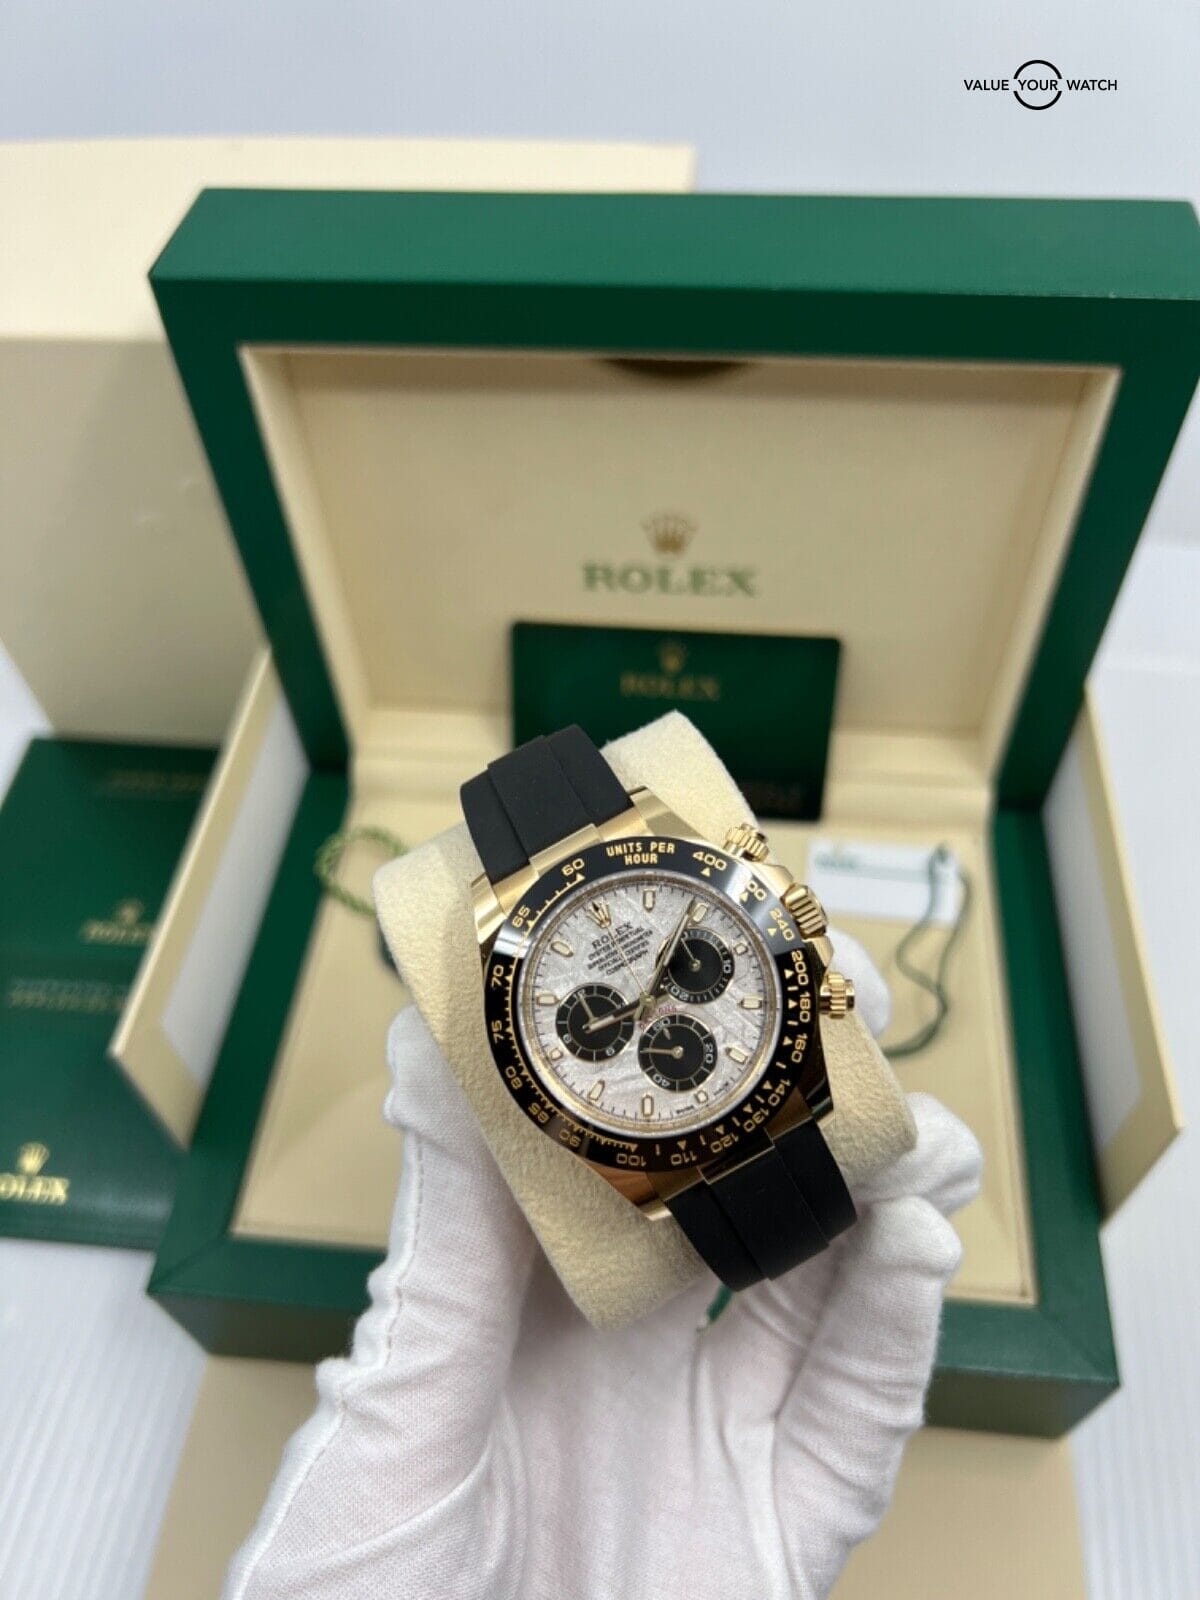 New 2023 White Tag Rolex Yellow Gold Meteorite 116518LN | Value Your